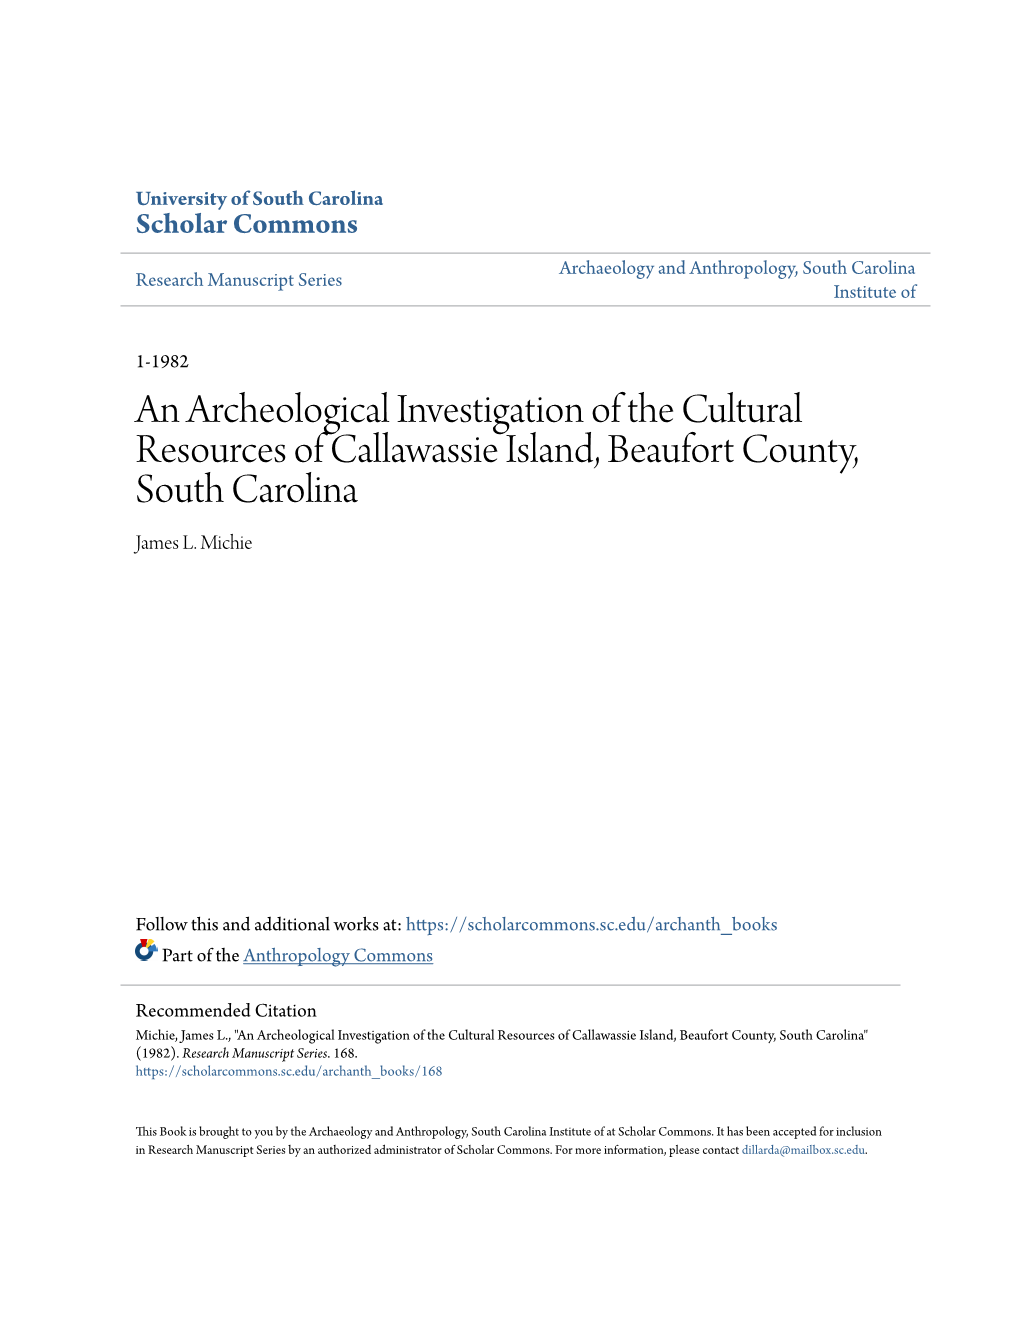 An Archeological Investigation of the Cultural Resources of Callawassie Island, Beaufort County, South Carolina James L